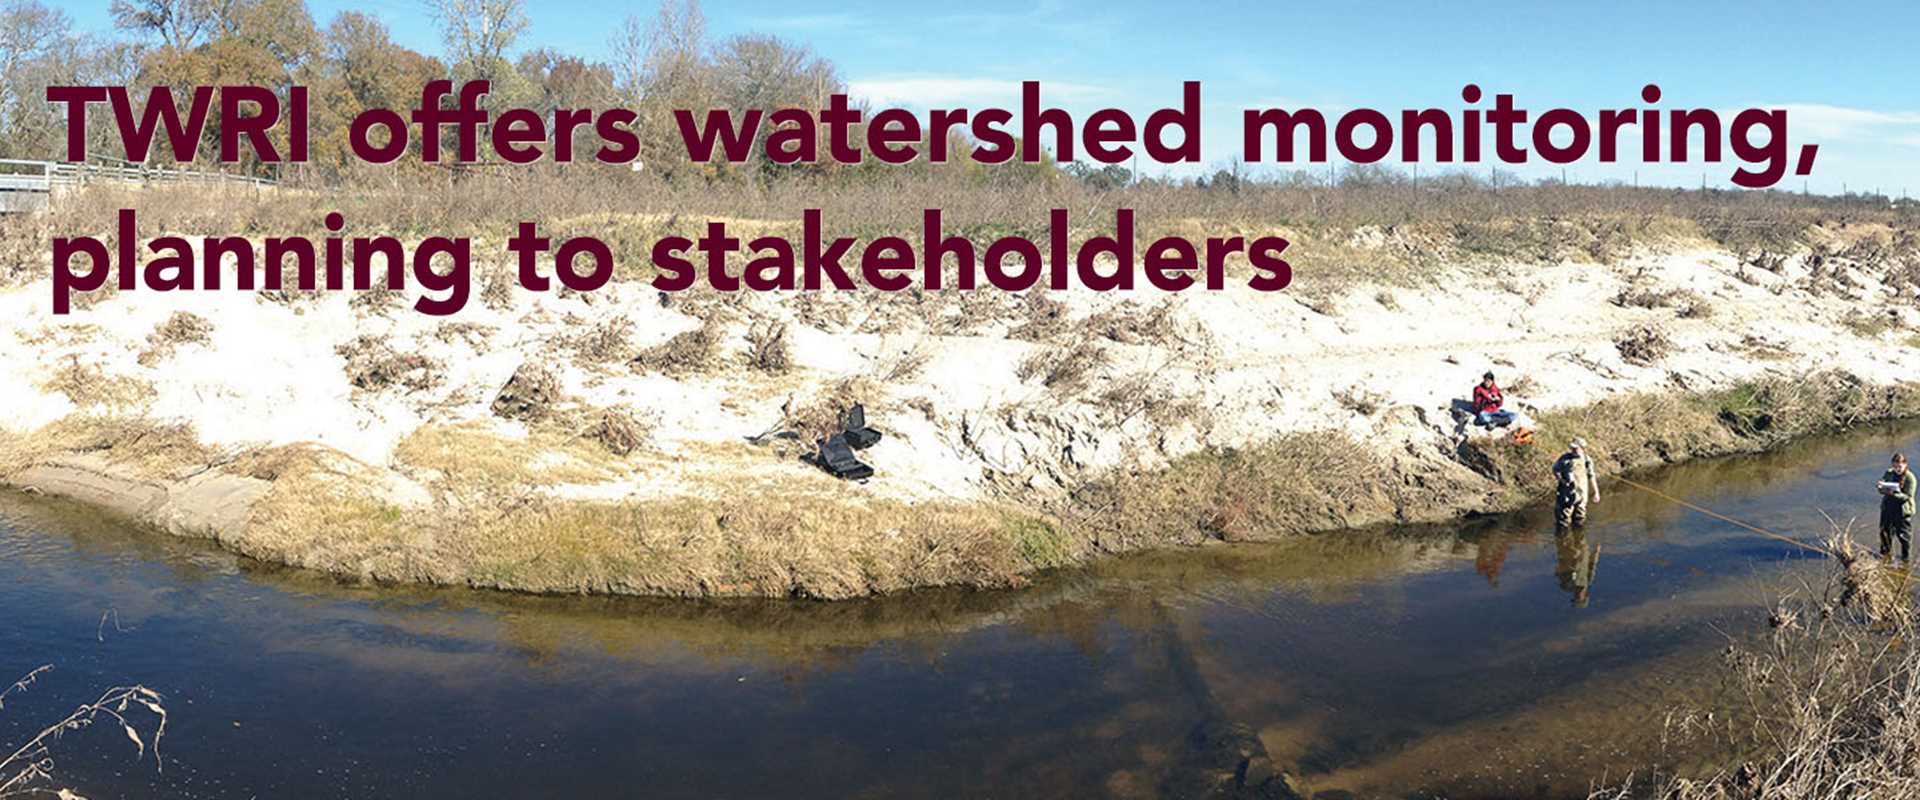 TWRI offers watershed monitoring, planning to stakeholders